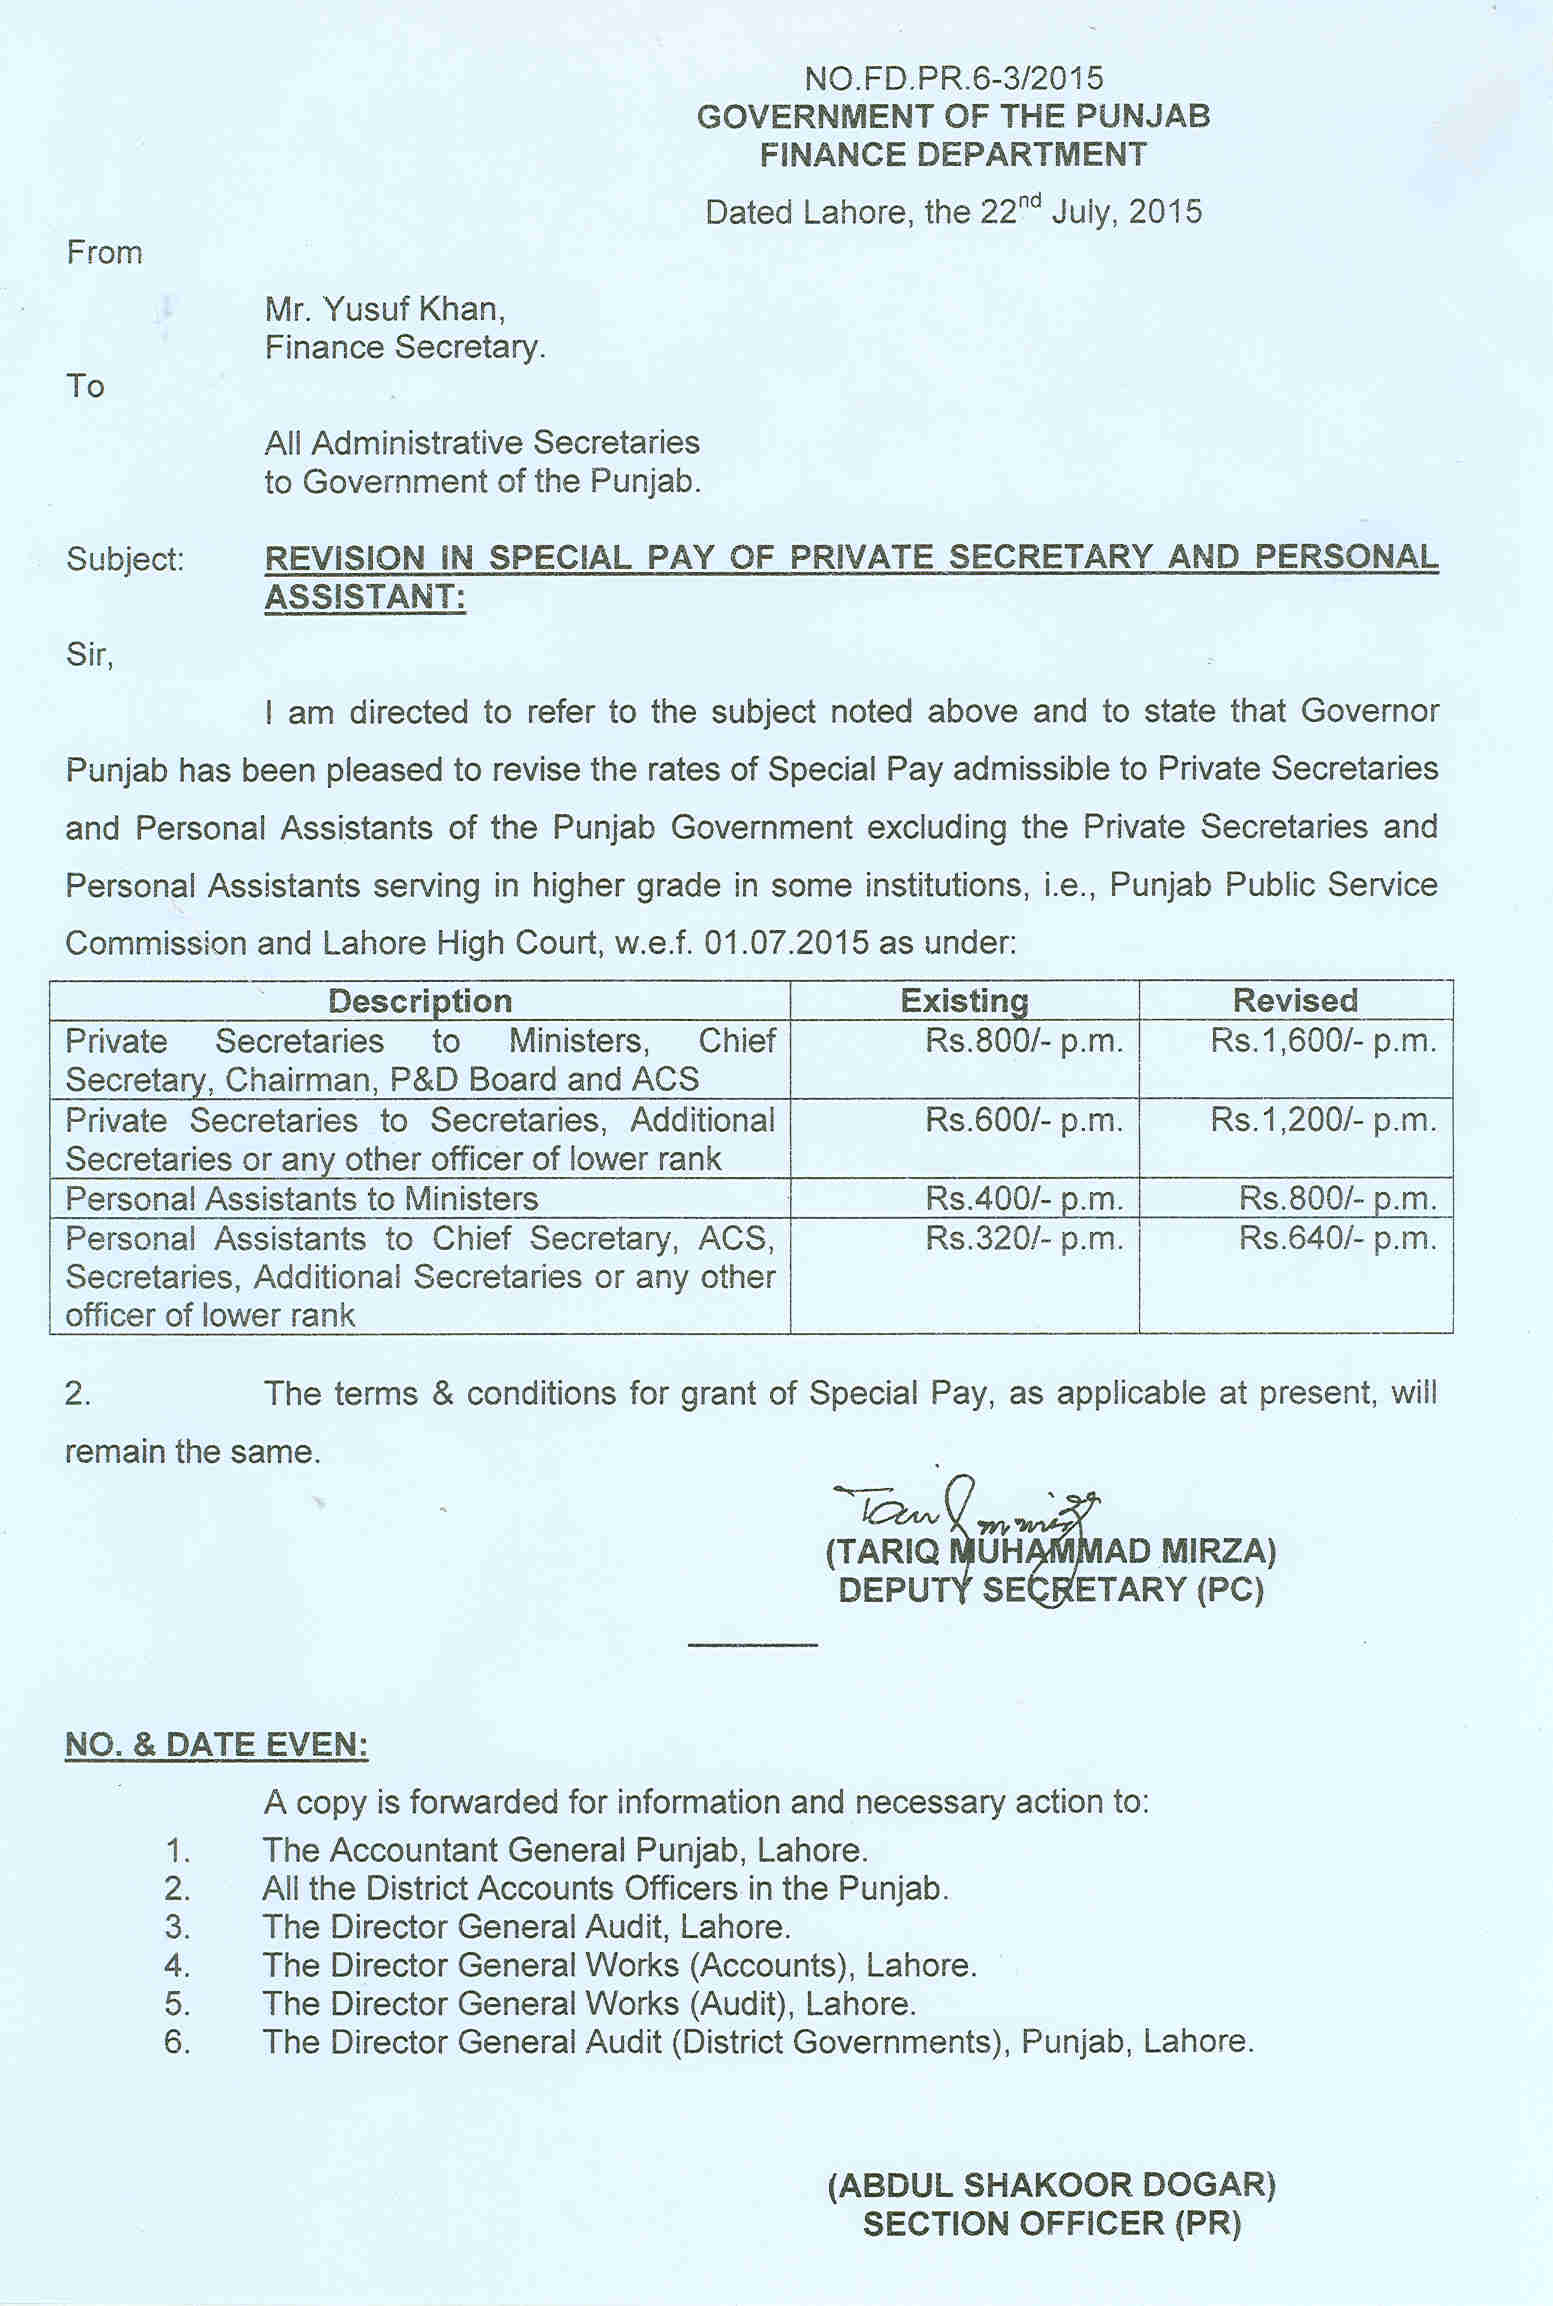 Revision in Special Pay of Private Secretary and Personal Assistant